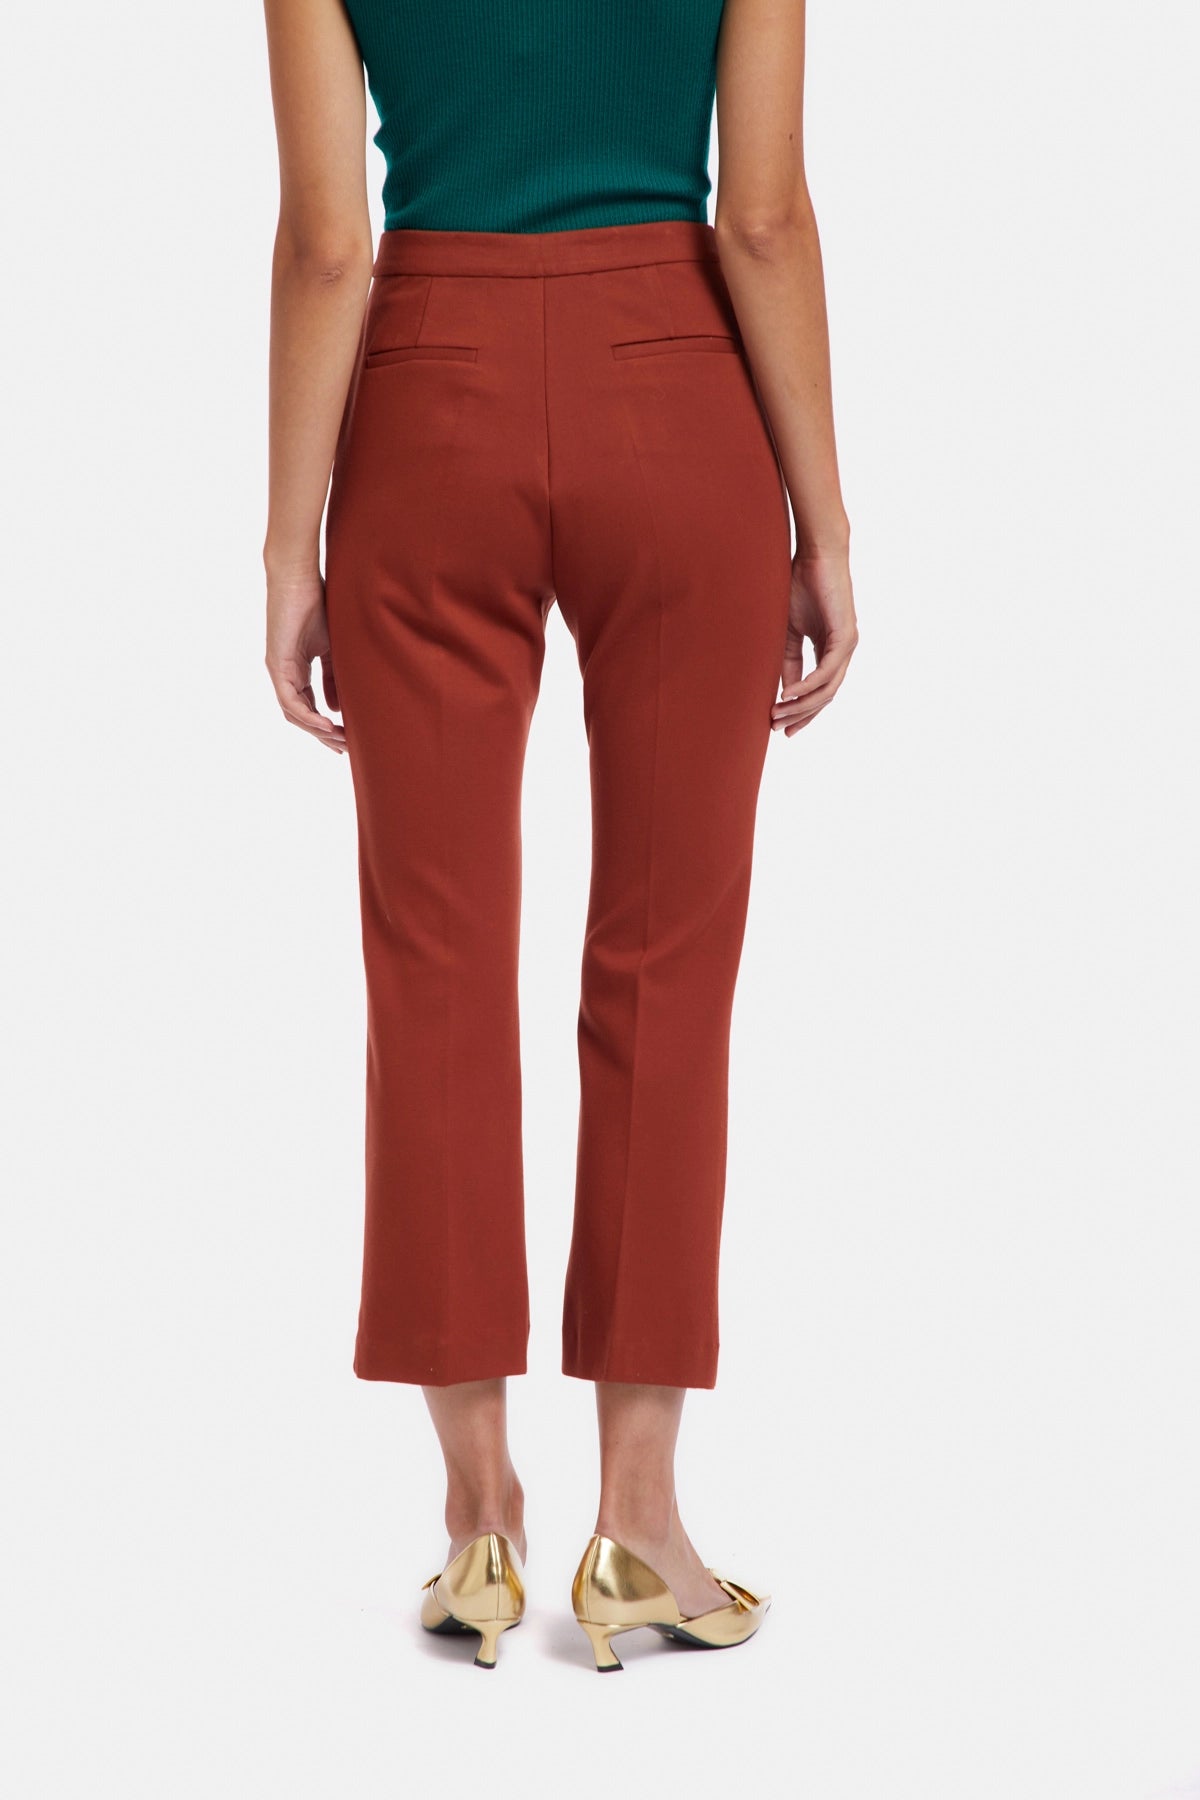 Trombetta Cropped Trousers